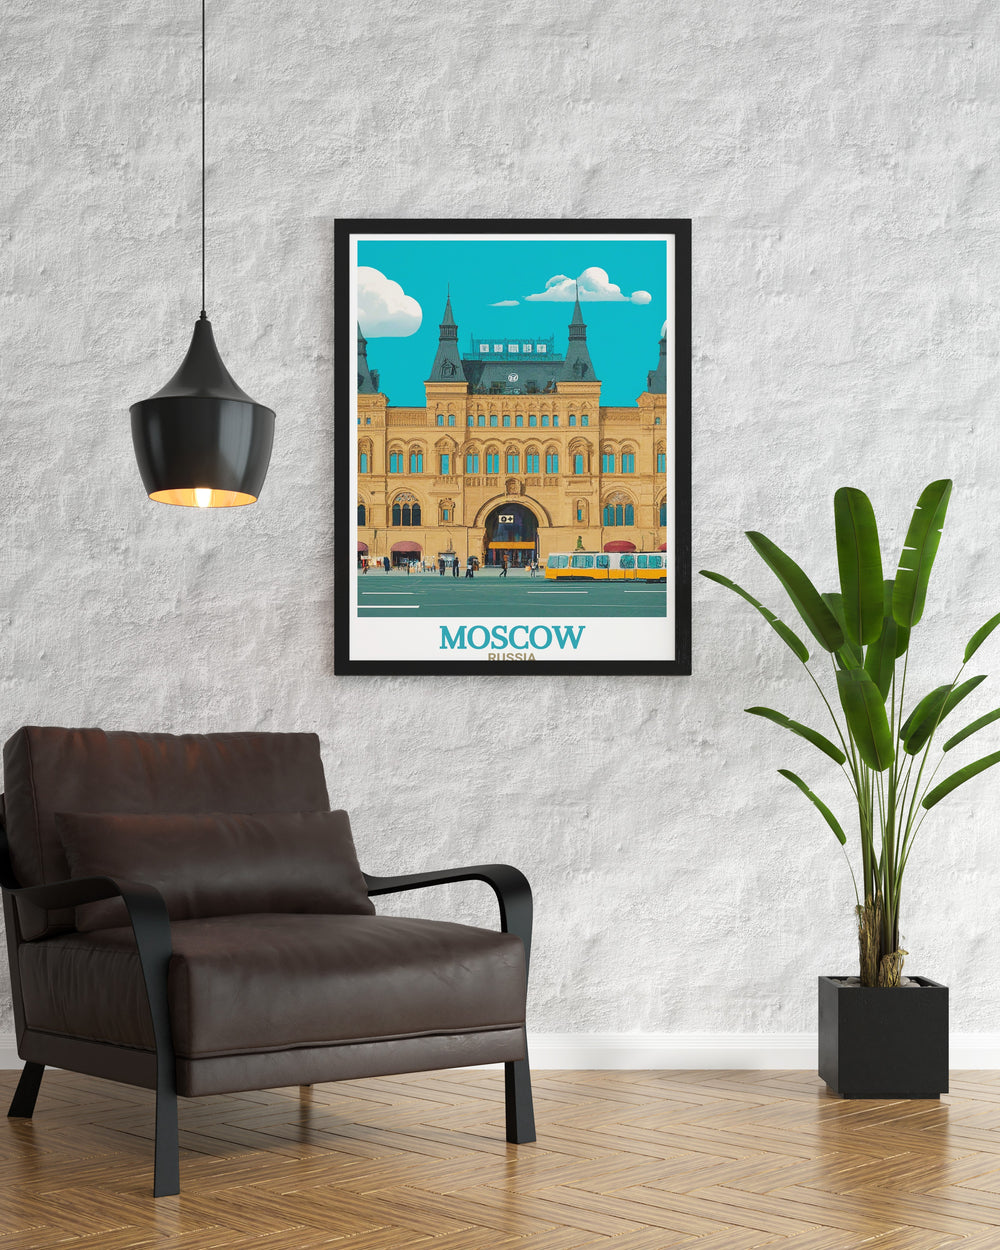 Stunning GUM Department Store wall art depicting the iconic landmark of Moscow a perfect addition to any room bringing sophistication and cultural richness with its detailed and vibrant illustration.